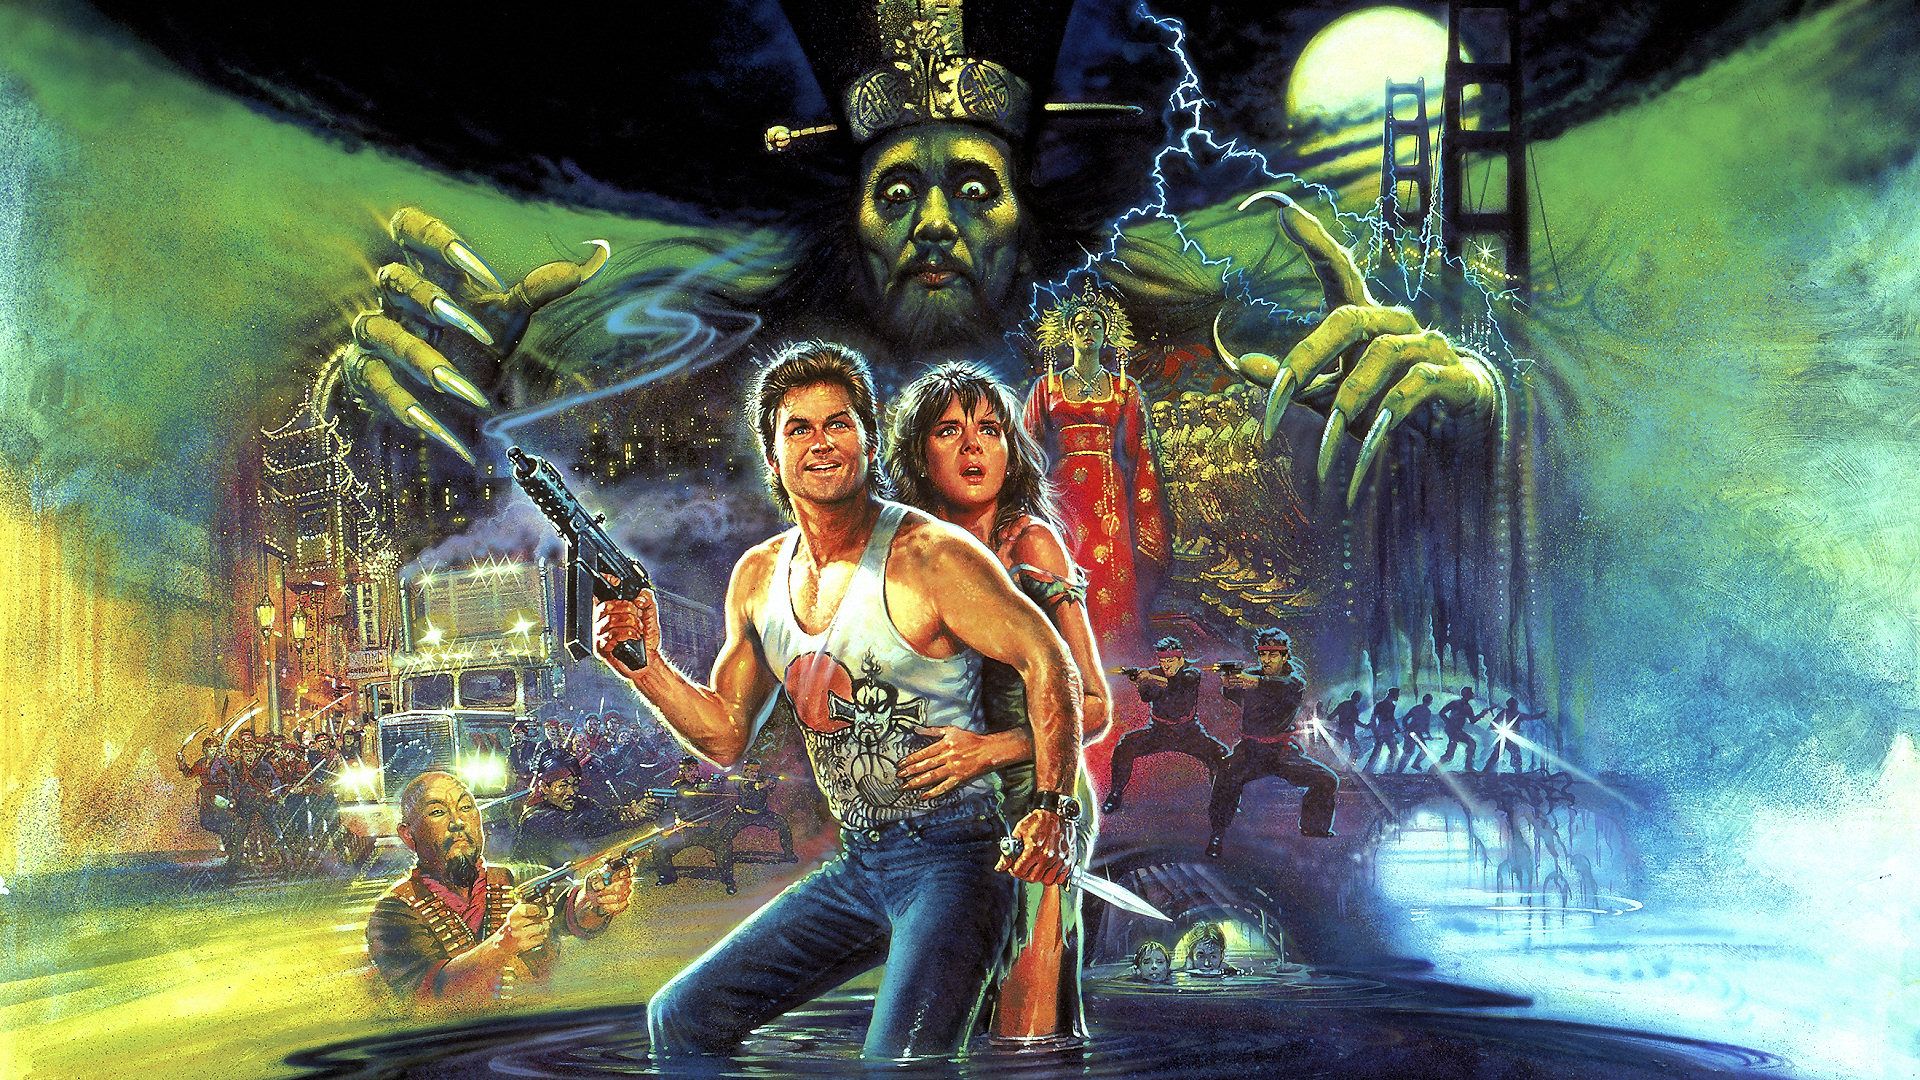 Big Trouble in Little China background